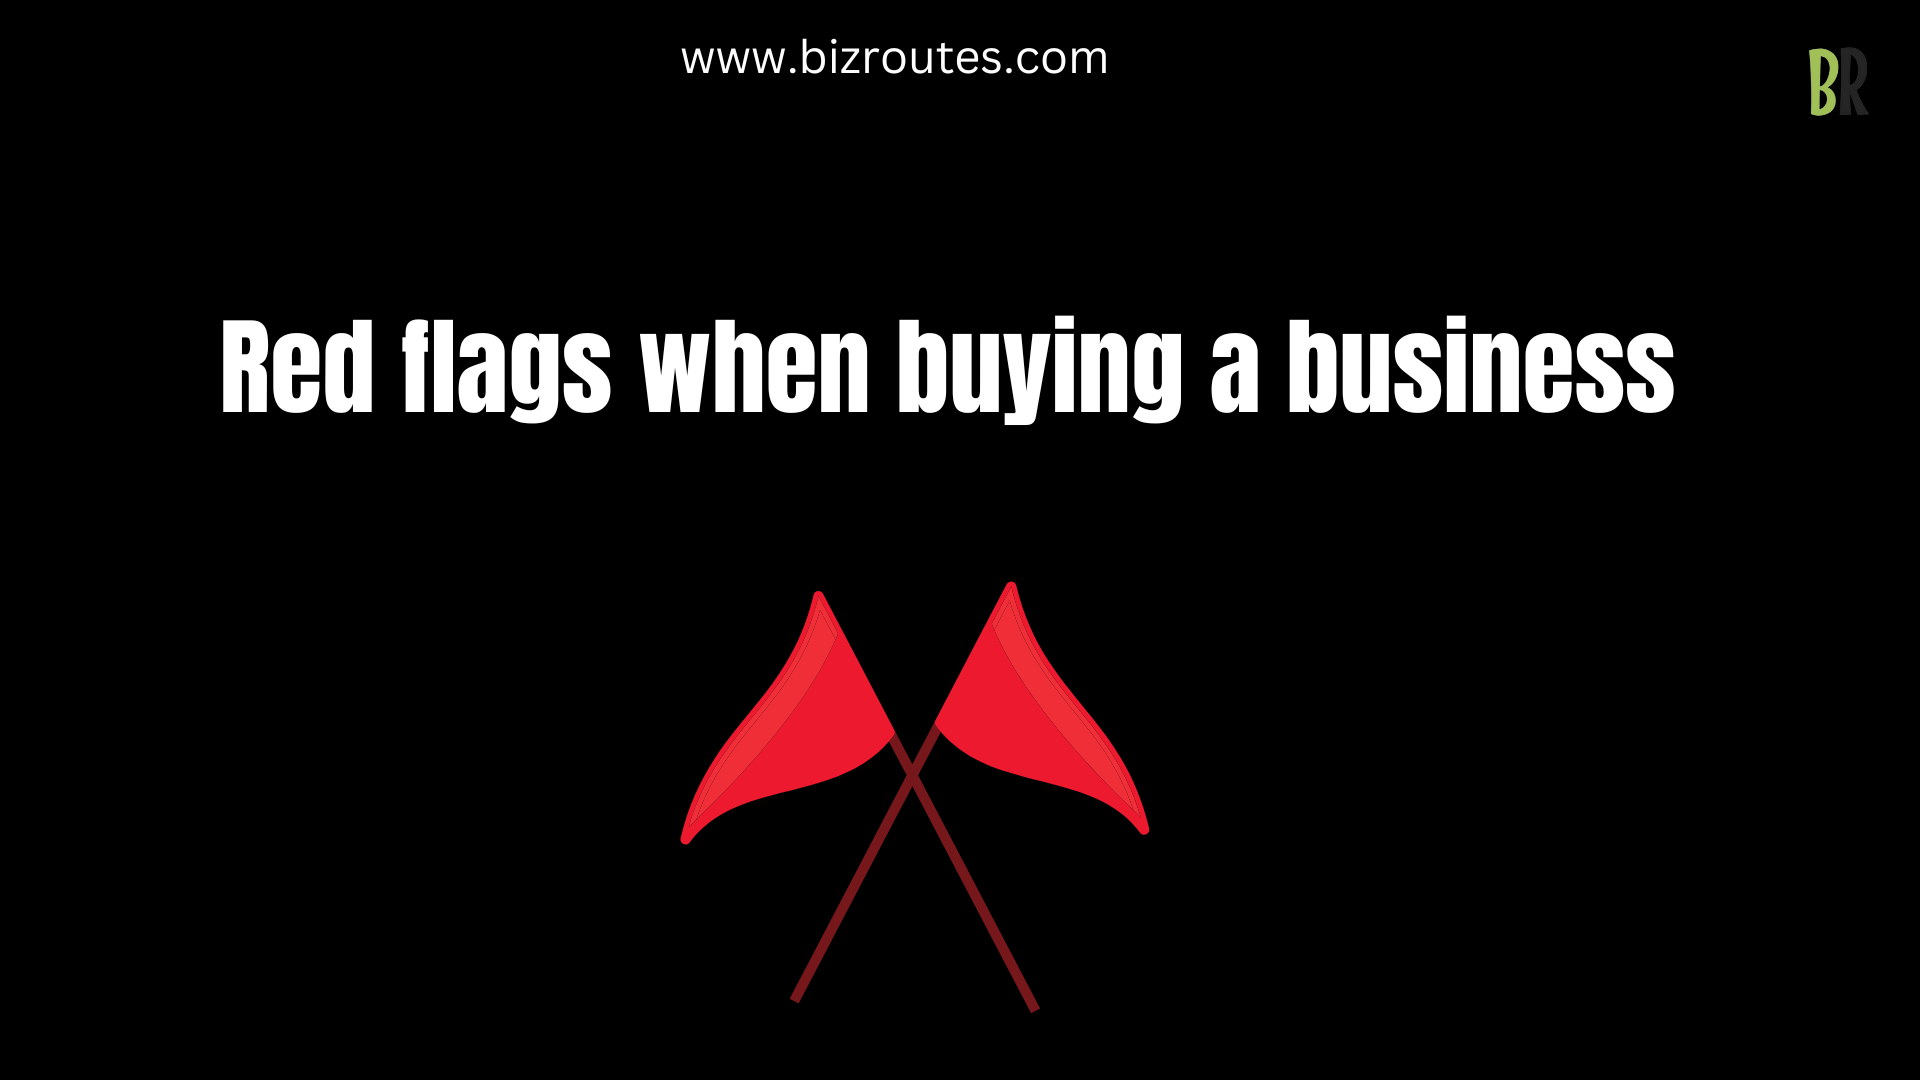 red flags when buying a business 